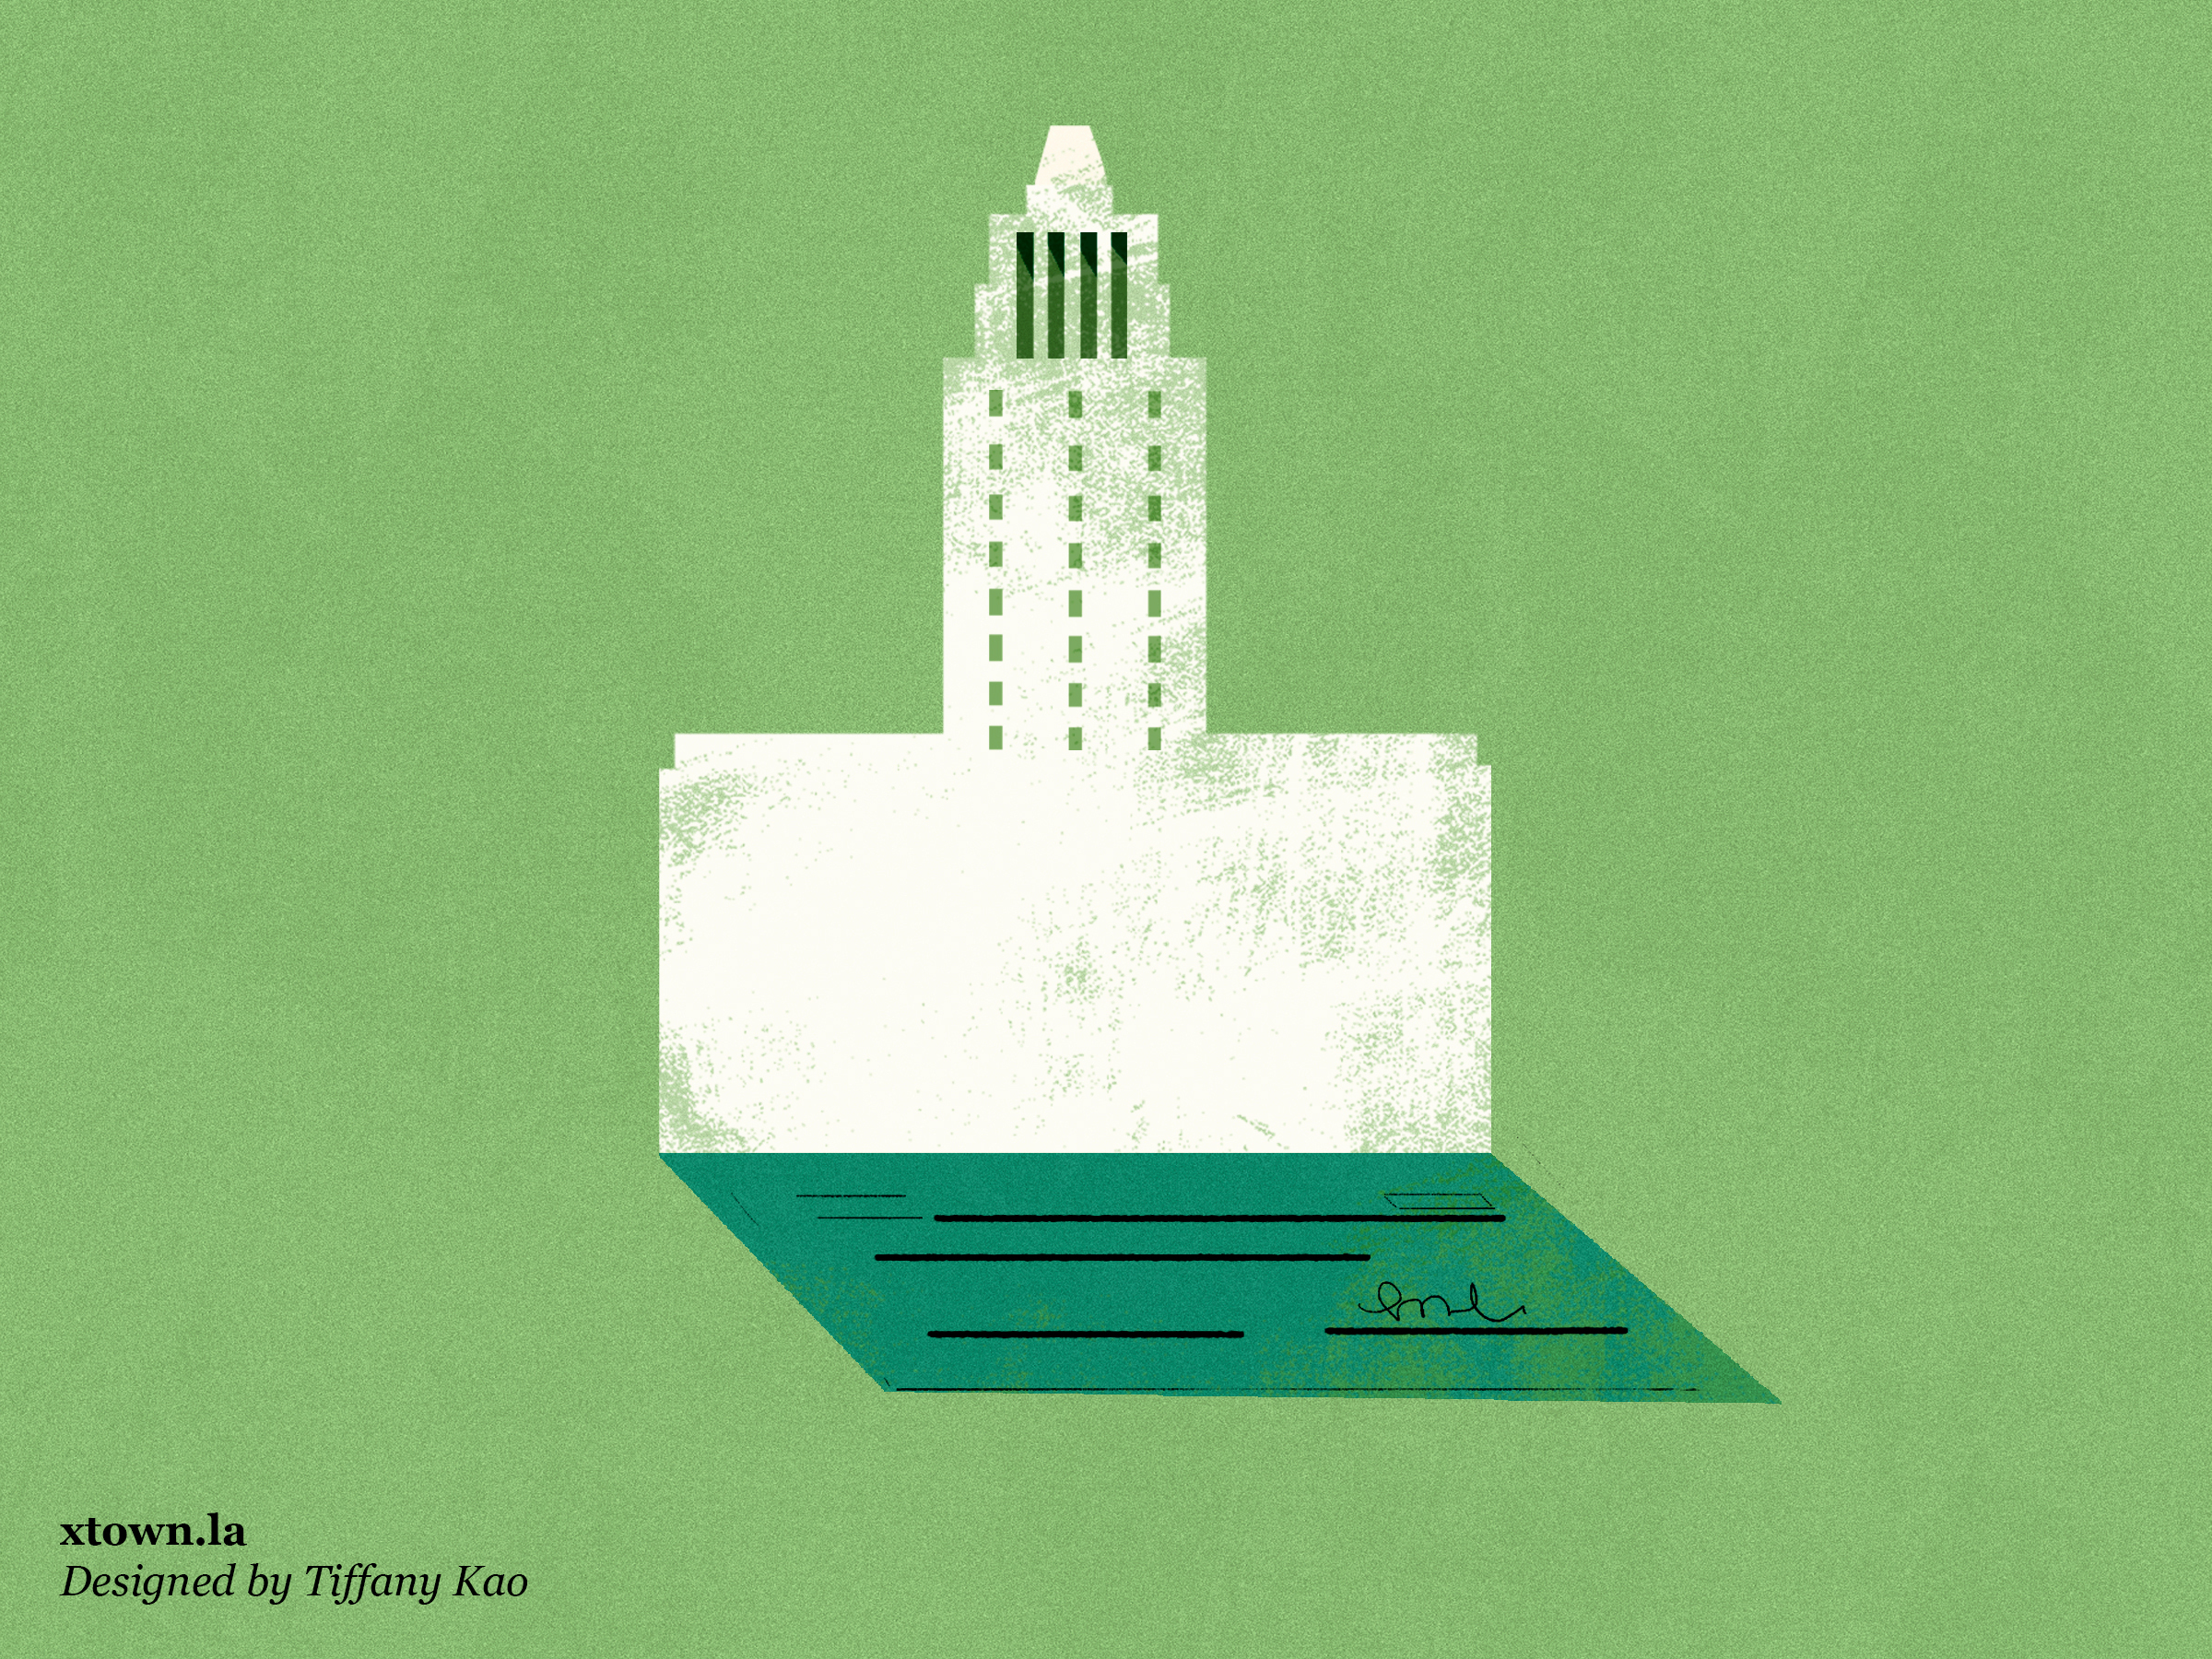 Illustration of City Hall with a green background and a blank check